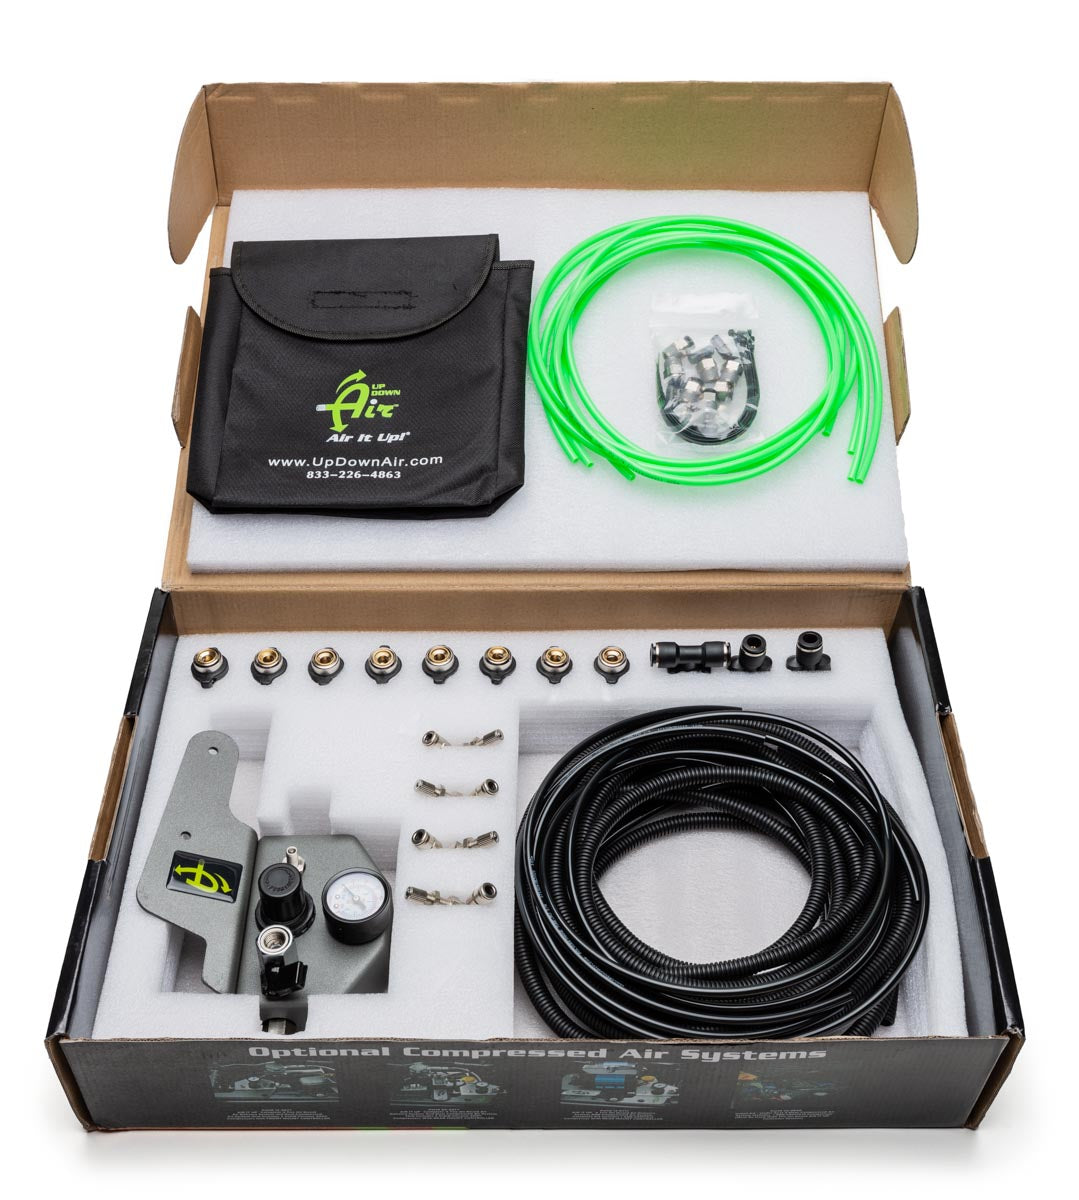 Jeep JK Tire Inflator System 4 Tire For 07-18 Wrangler JK 2/4 Door W/Engine Mount With Box, Fittings, Hoses and Storage Bag Black UP Down Air